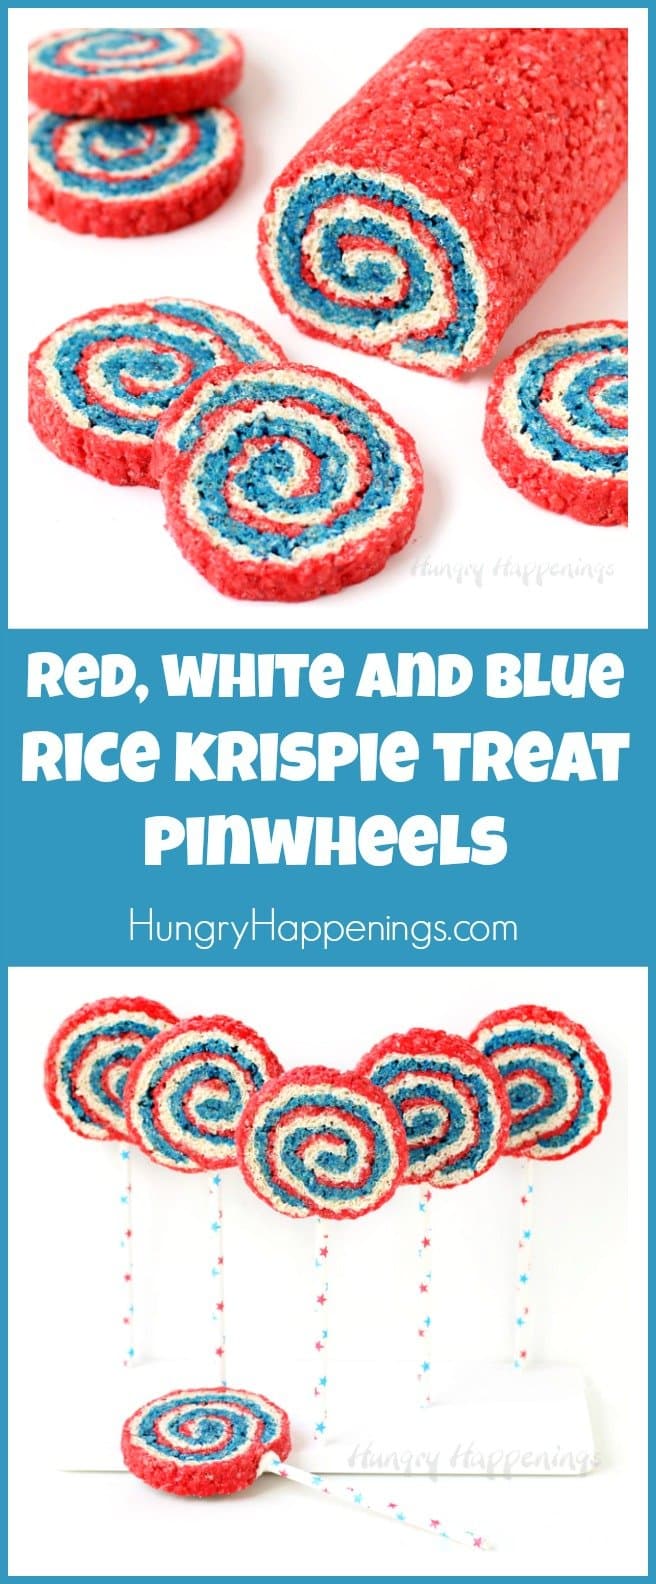 Red, White, and Blue Rice Krispie Treat Pinwheels cut into slices with some on lollipop sticks.